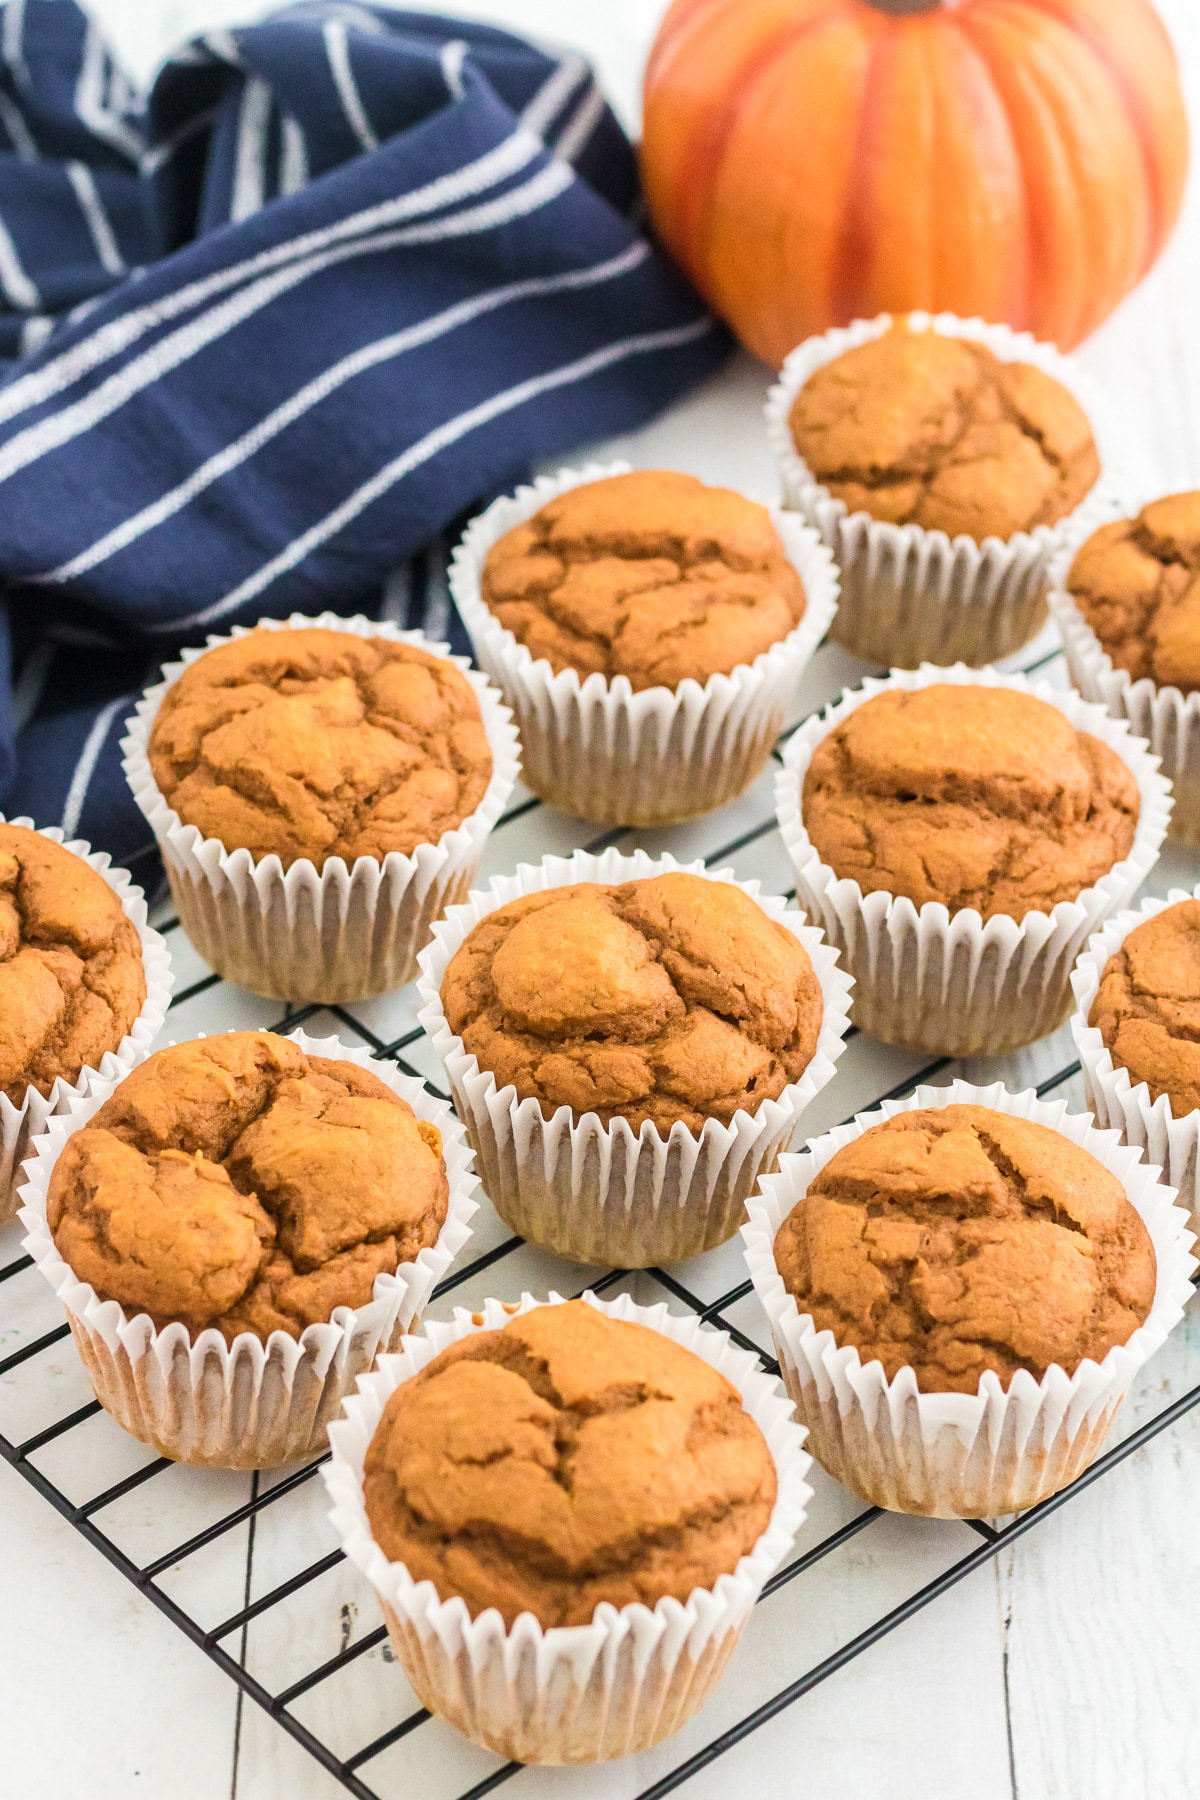 Pumpkin muffins in paper liners on a cooling rack next to a pumpkin.